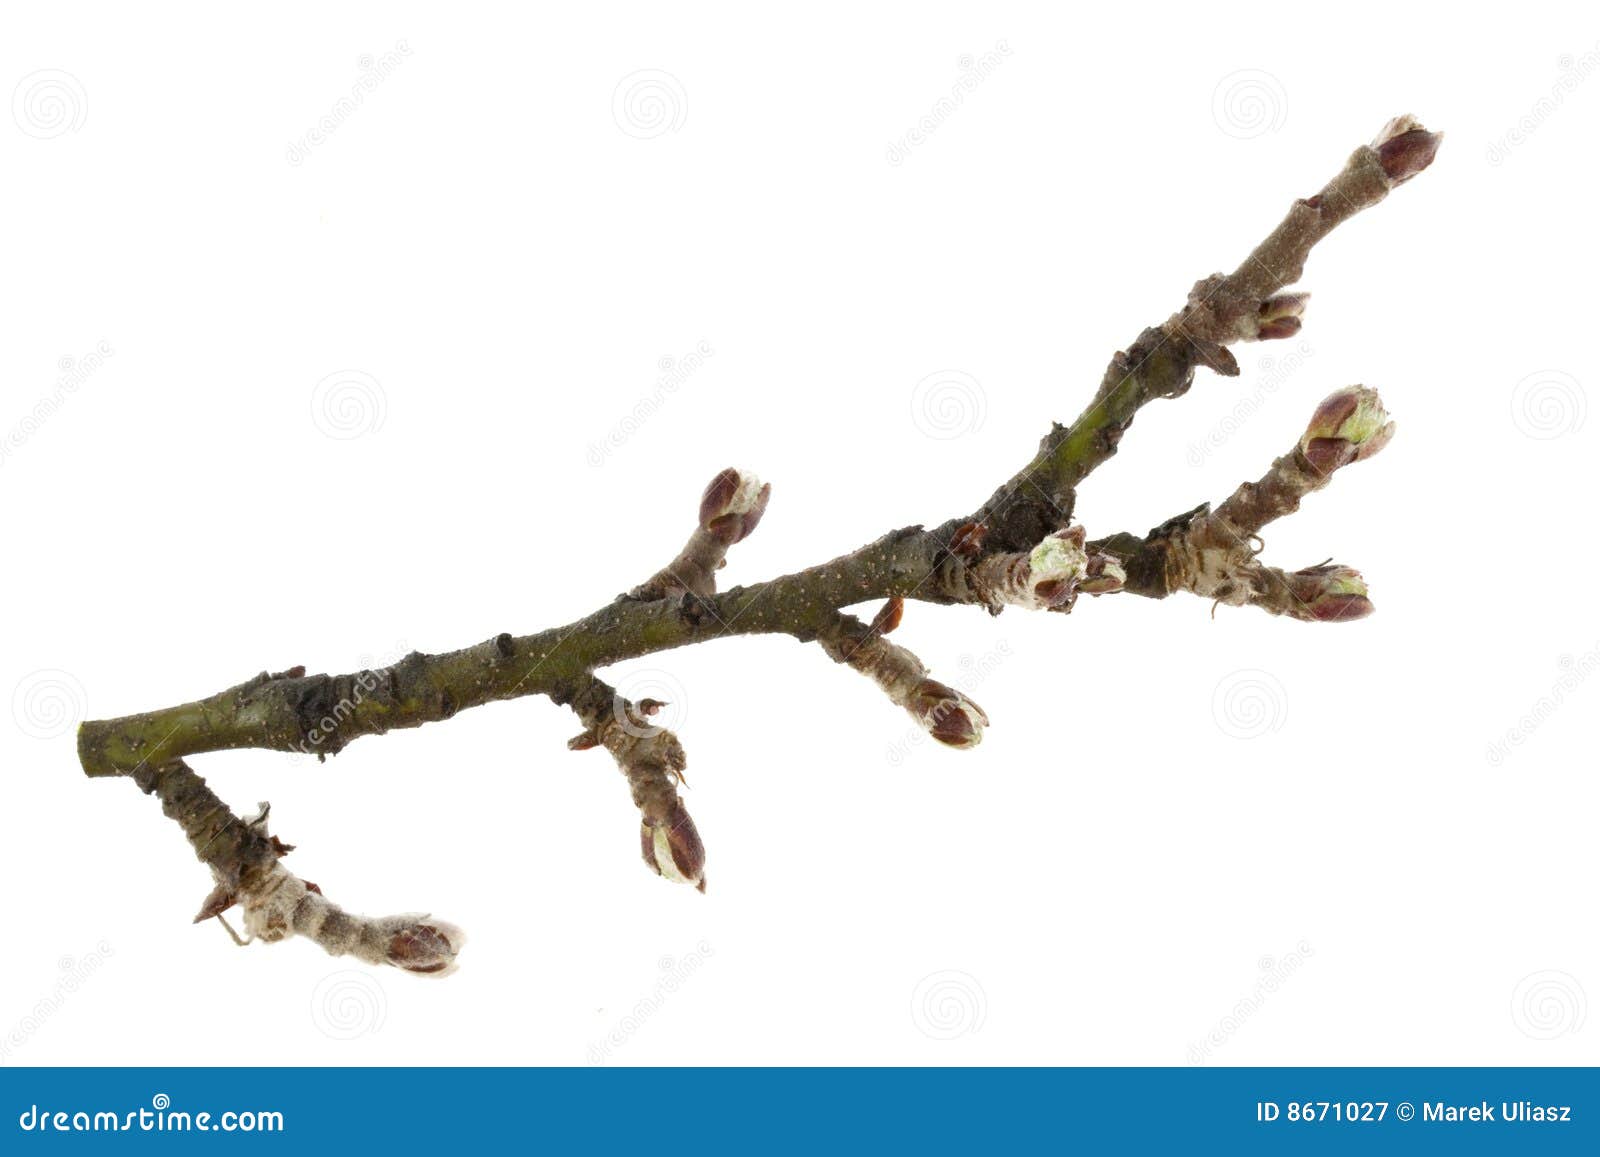 clipart tree buds - photo #39